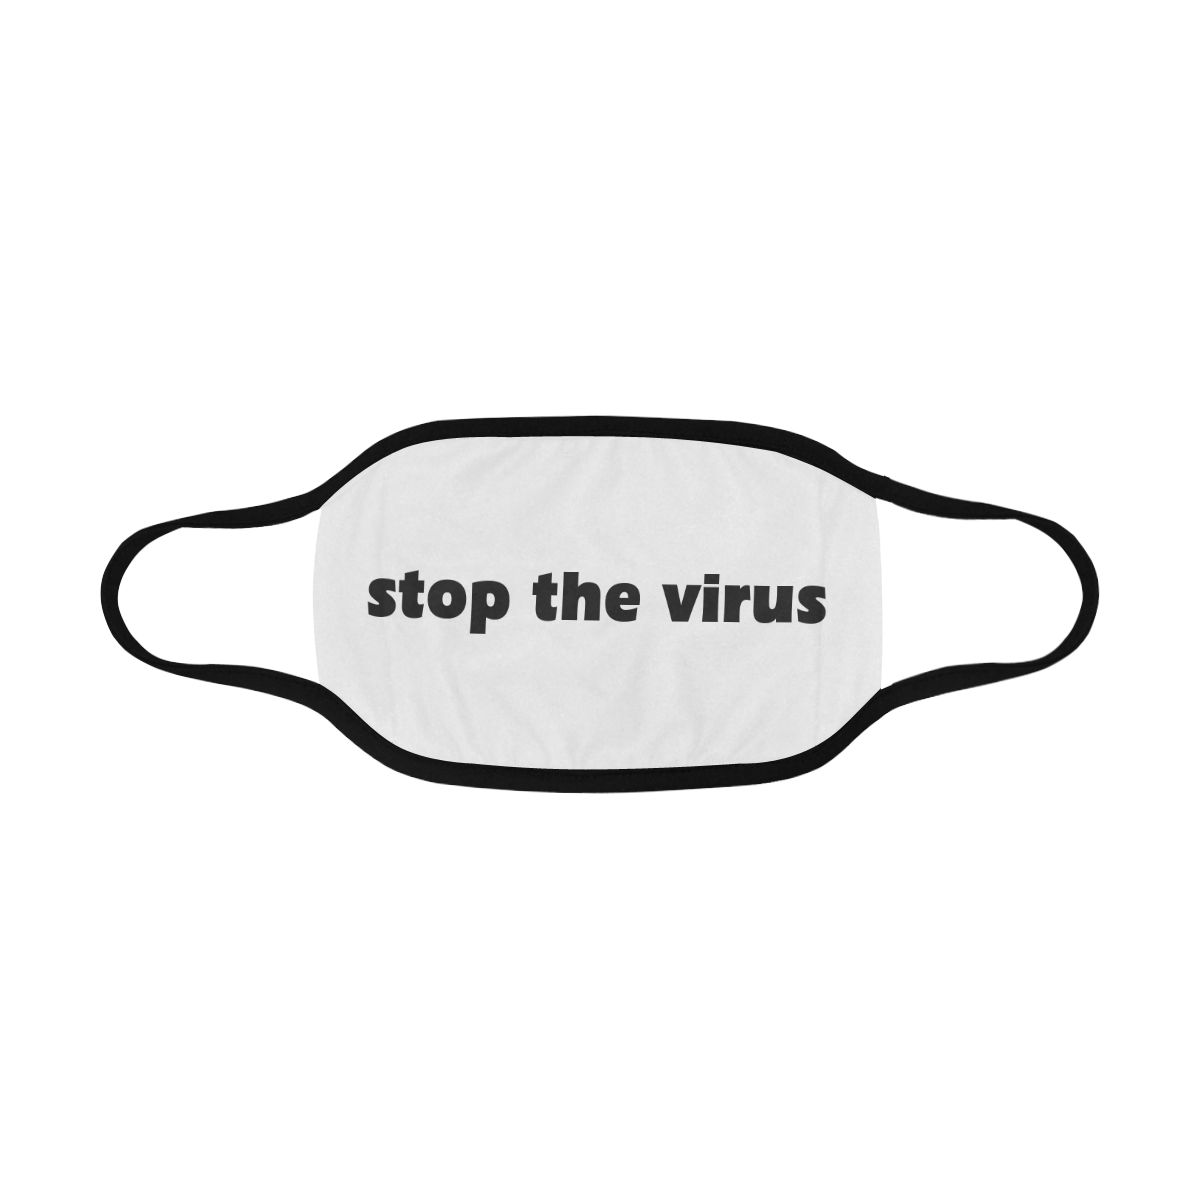 Stop the virus Mouth Mask